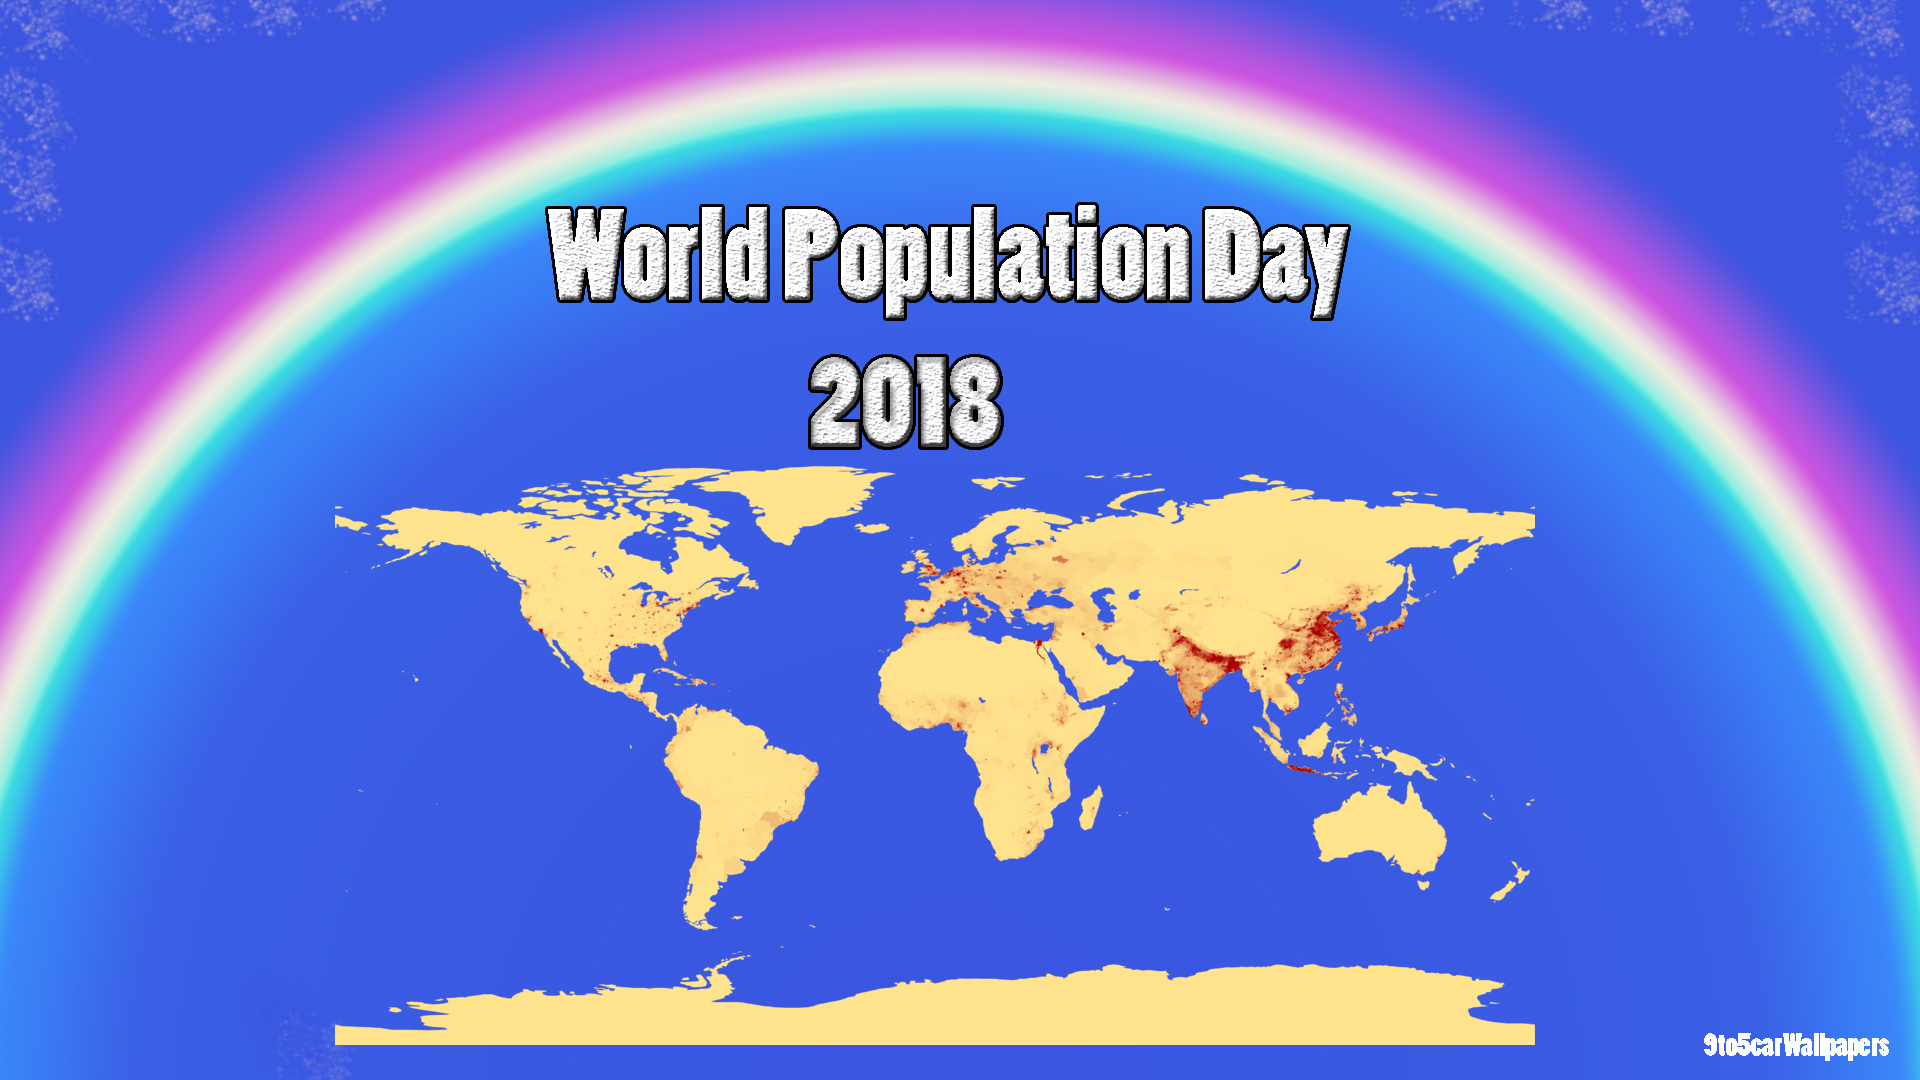 world-population-day-2018-images-cards-wallpapers